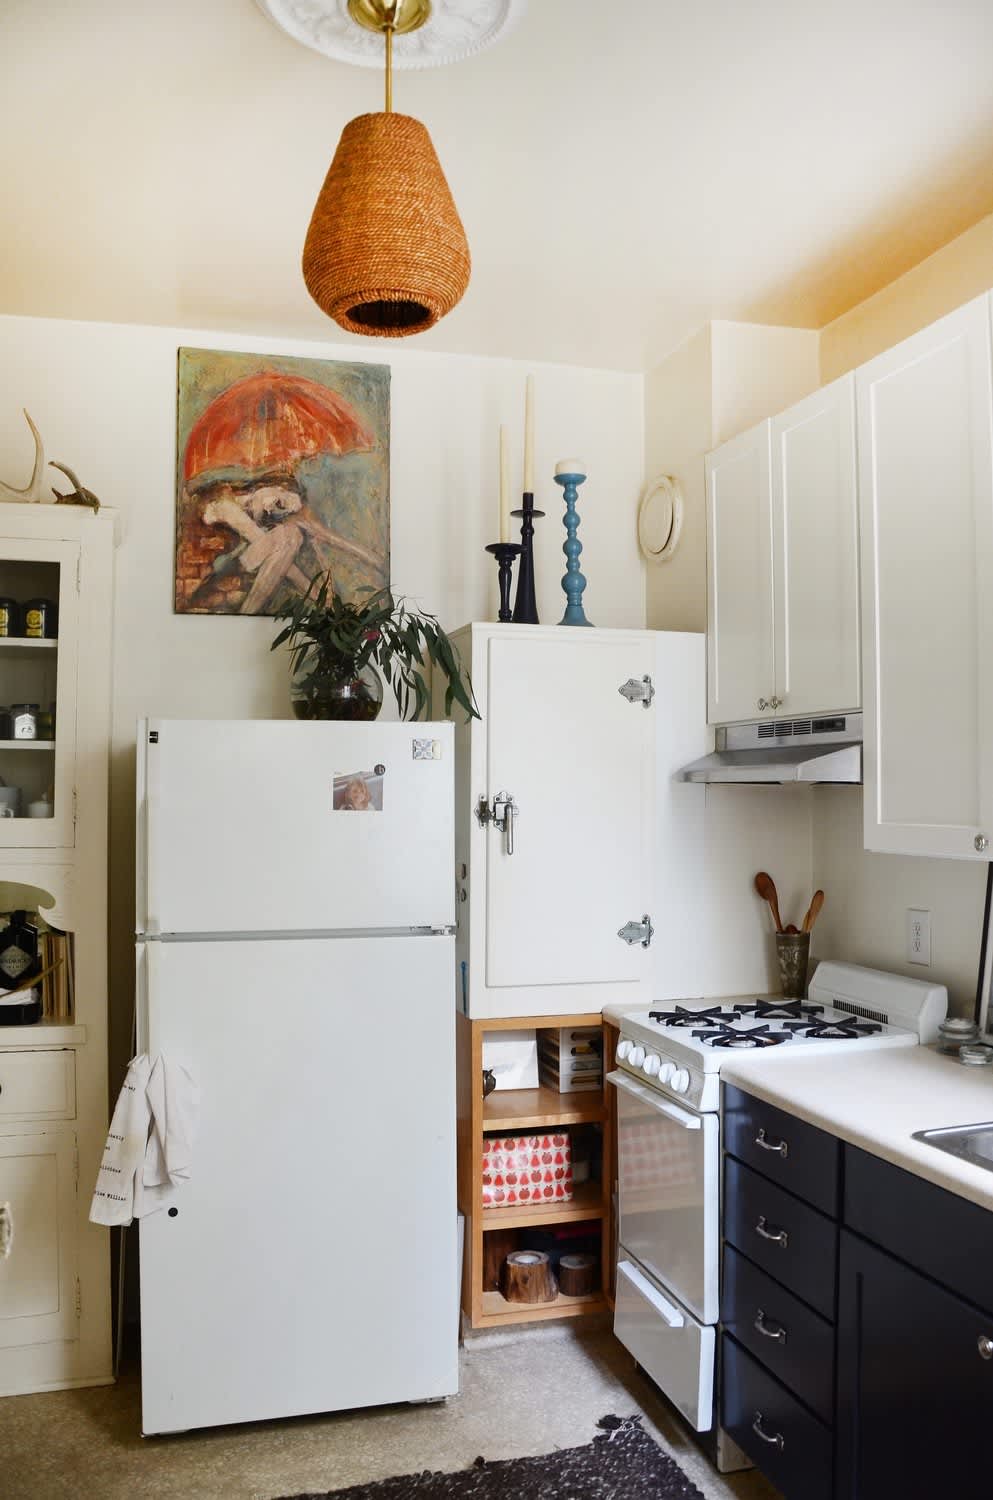 What To Do if Your Kitchen Doesn't Have a Vent